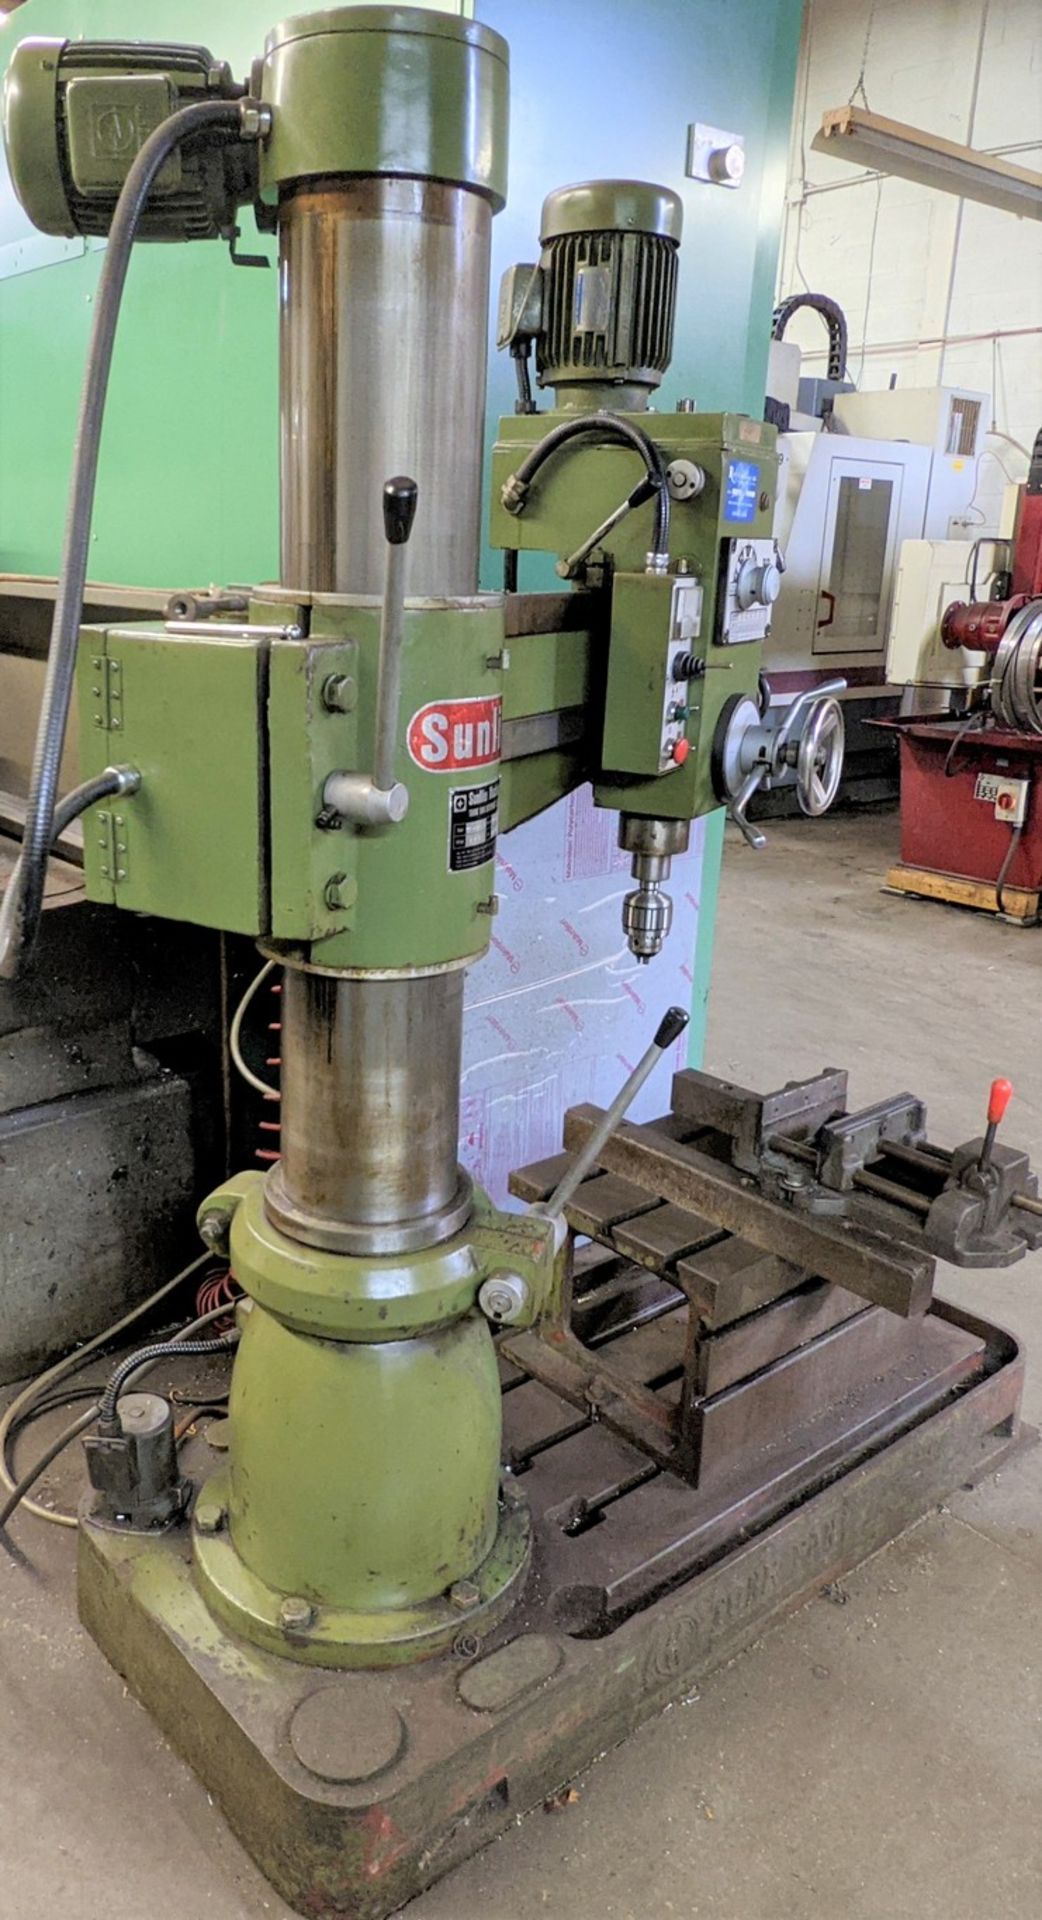 TONE FAN TF-900S RADIAL ARM DRILL, 4’ ARM, S/N TY-960707 W/ BOX TABLE AND VISE - Image 3 of 11